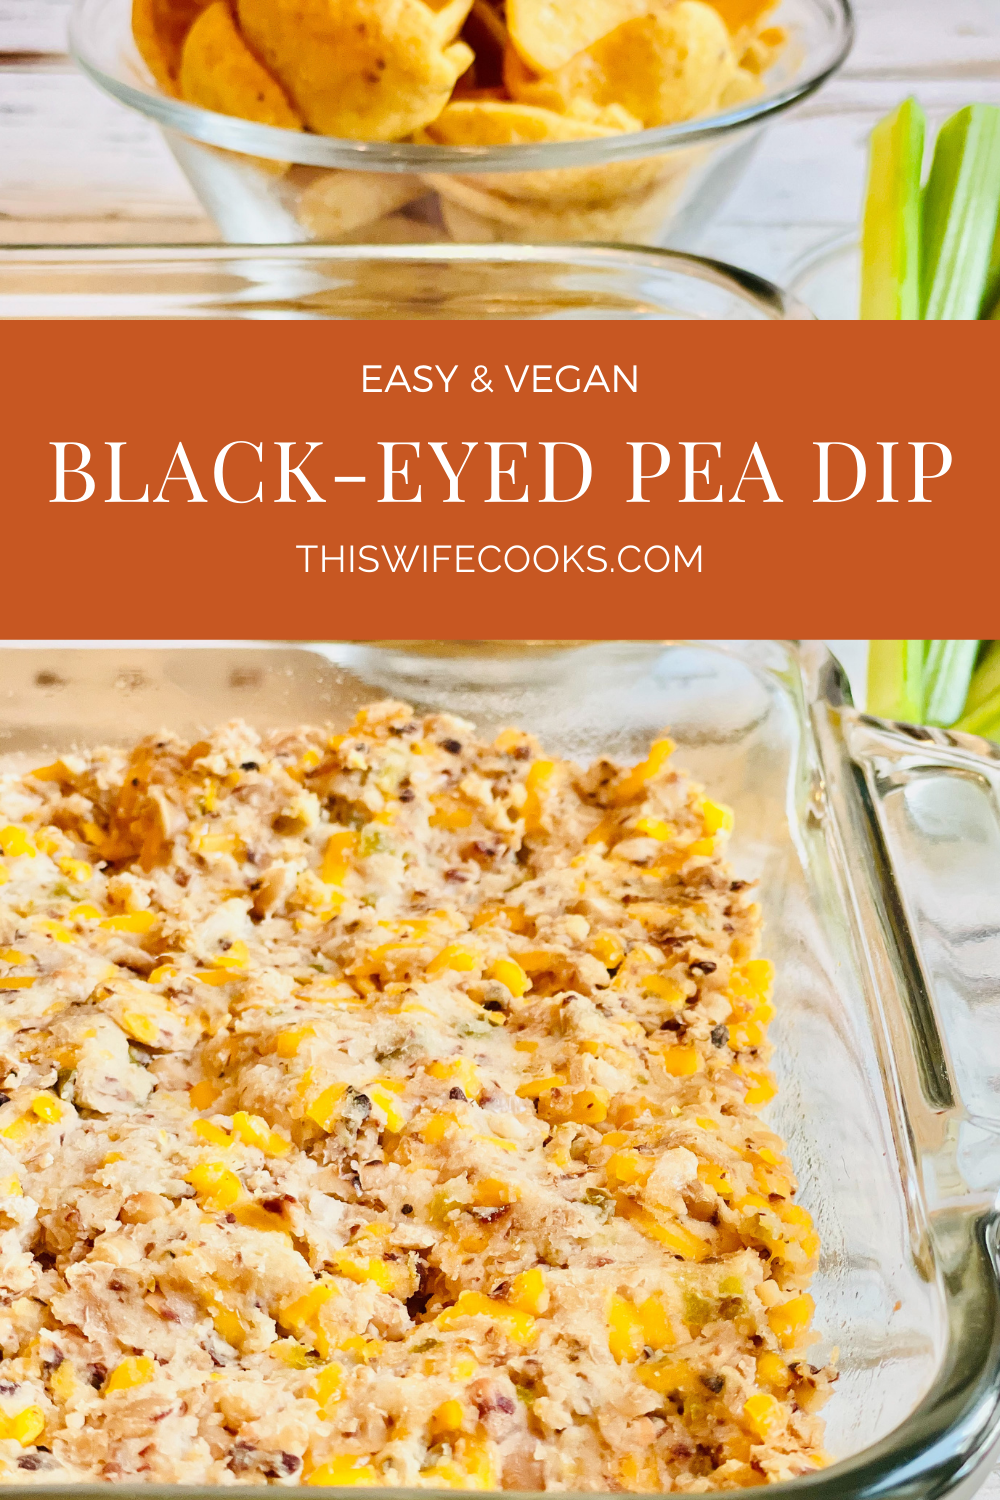 Baked Black-Eyed Pea Dip ~A quick and easy Southern-style dip! Six simple ingredients and ready 30 minutes! via @thiswifecooks